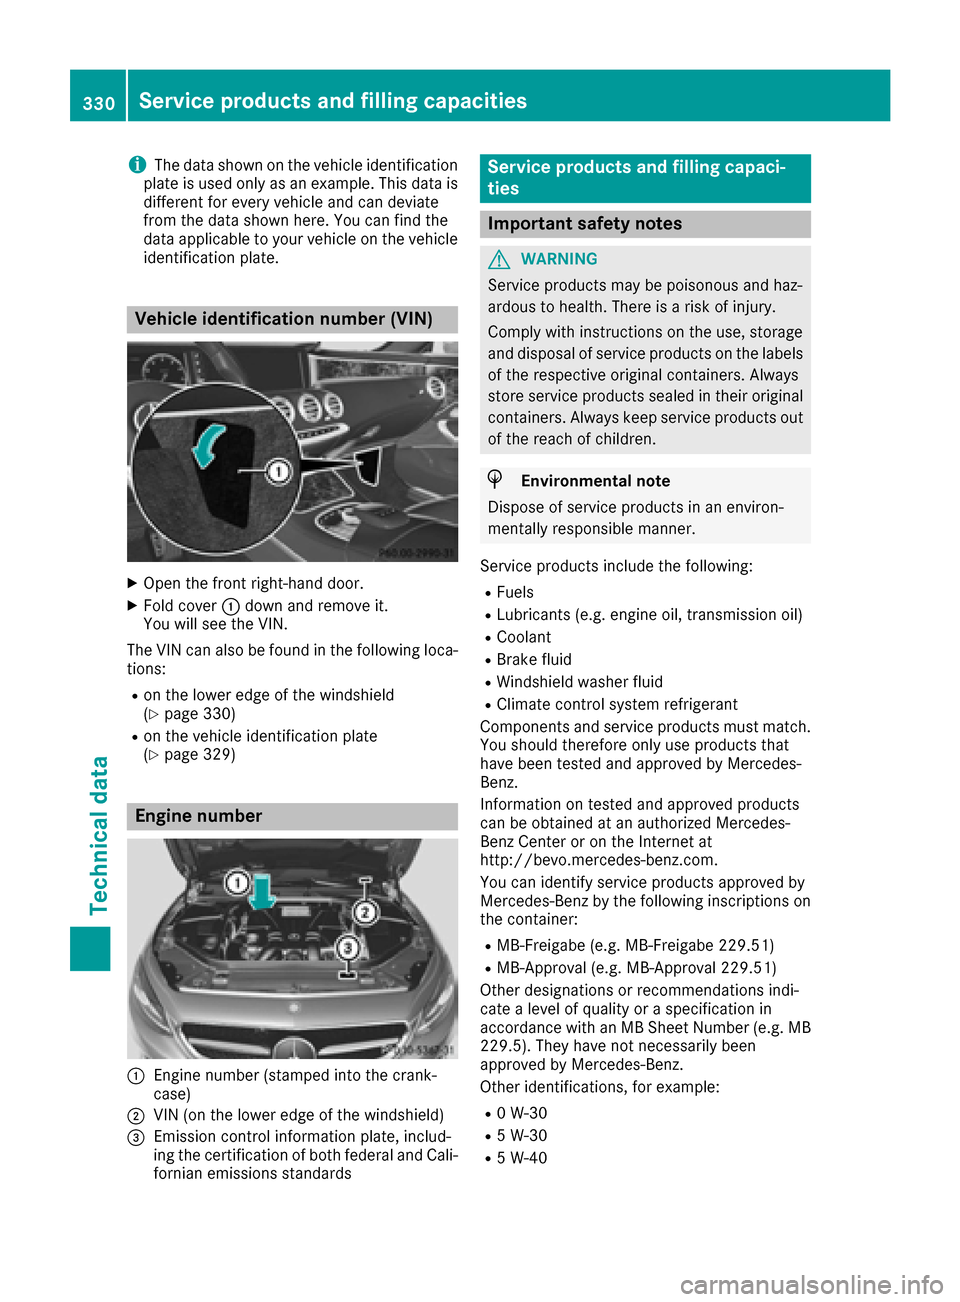 MERCEDES-BENZ S-Class COUPE 2017 C217 Owners Manual iThe data shown on the vehicle identification
plate is used only as an example. This data is
different for every vehicle and can deviate
from the data shown here. You can find the
data applicable to y